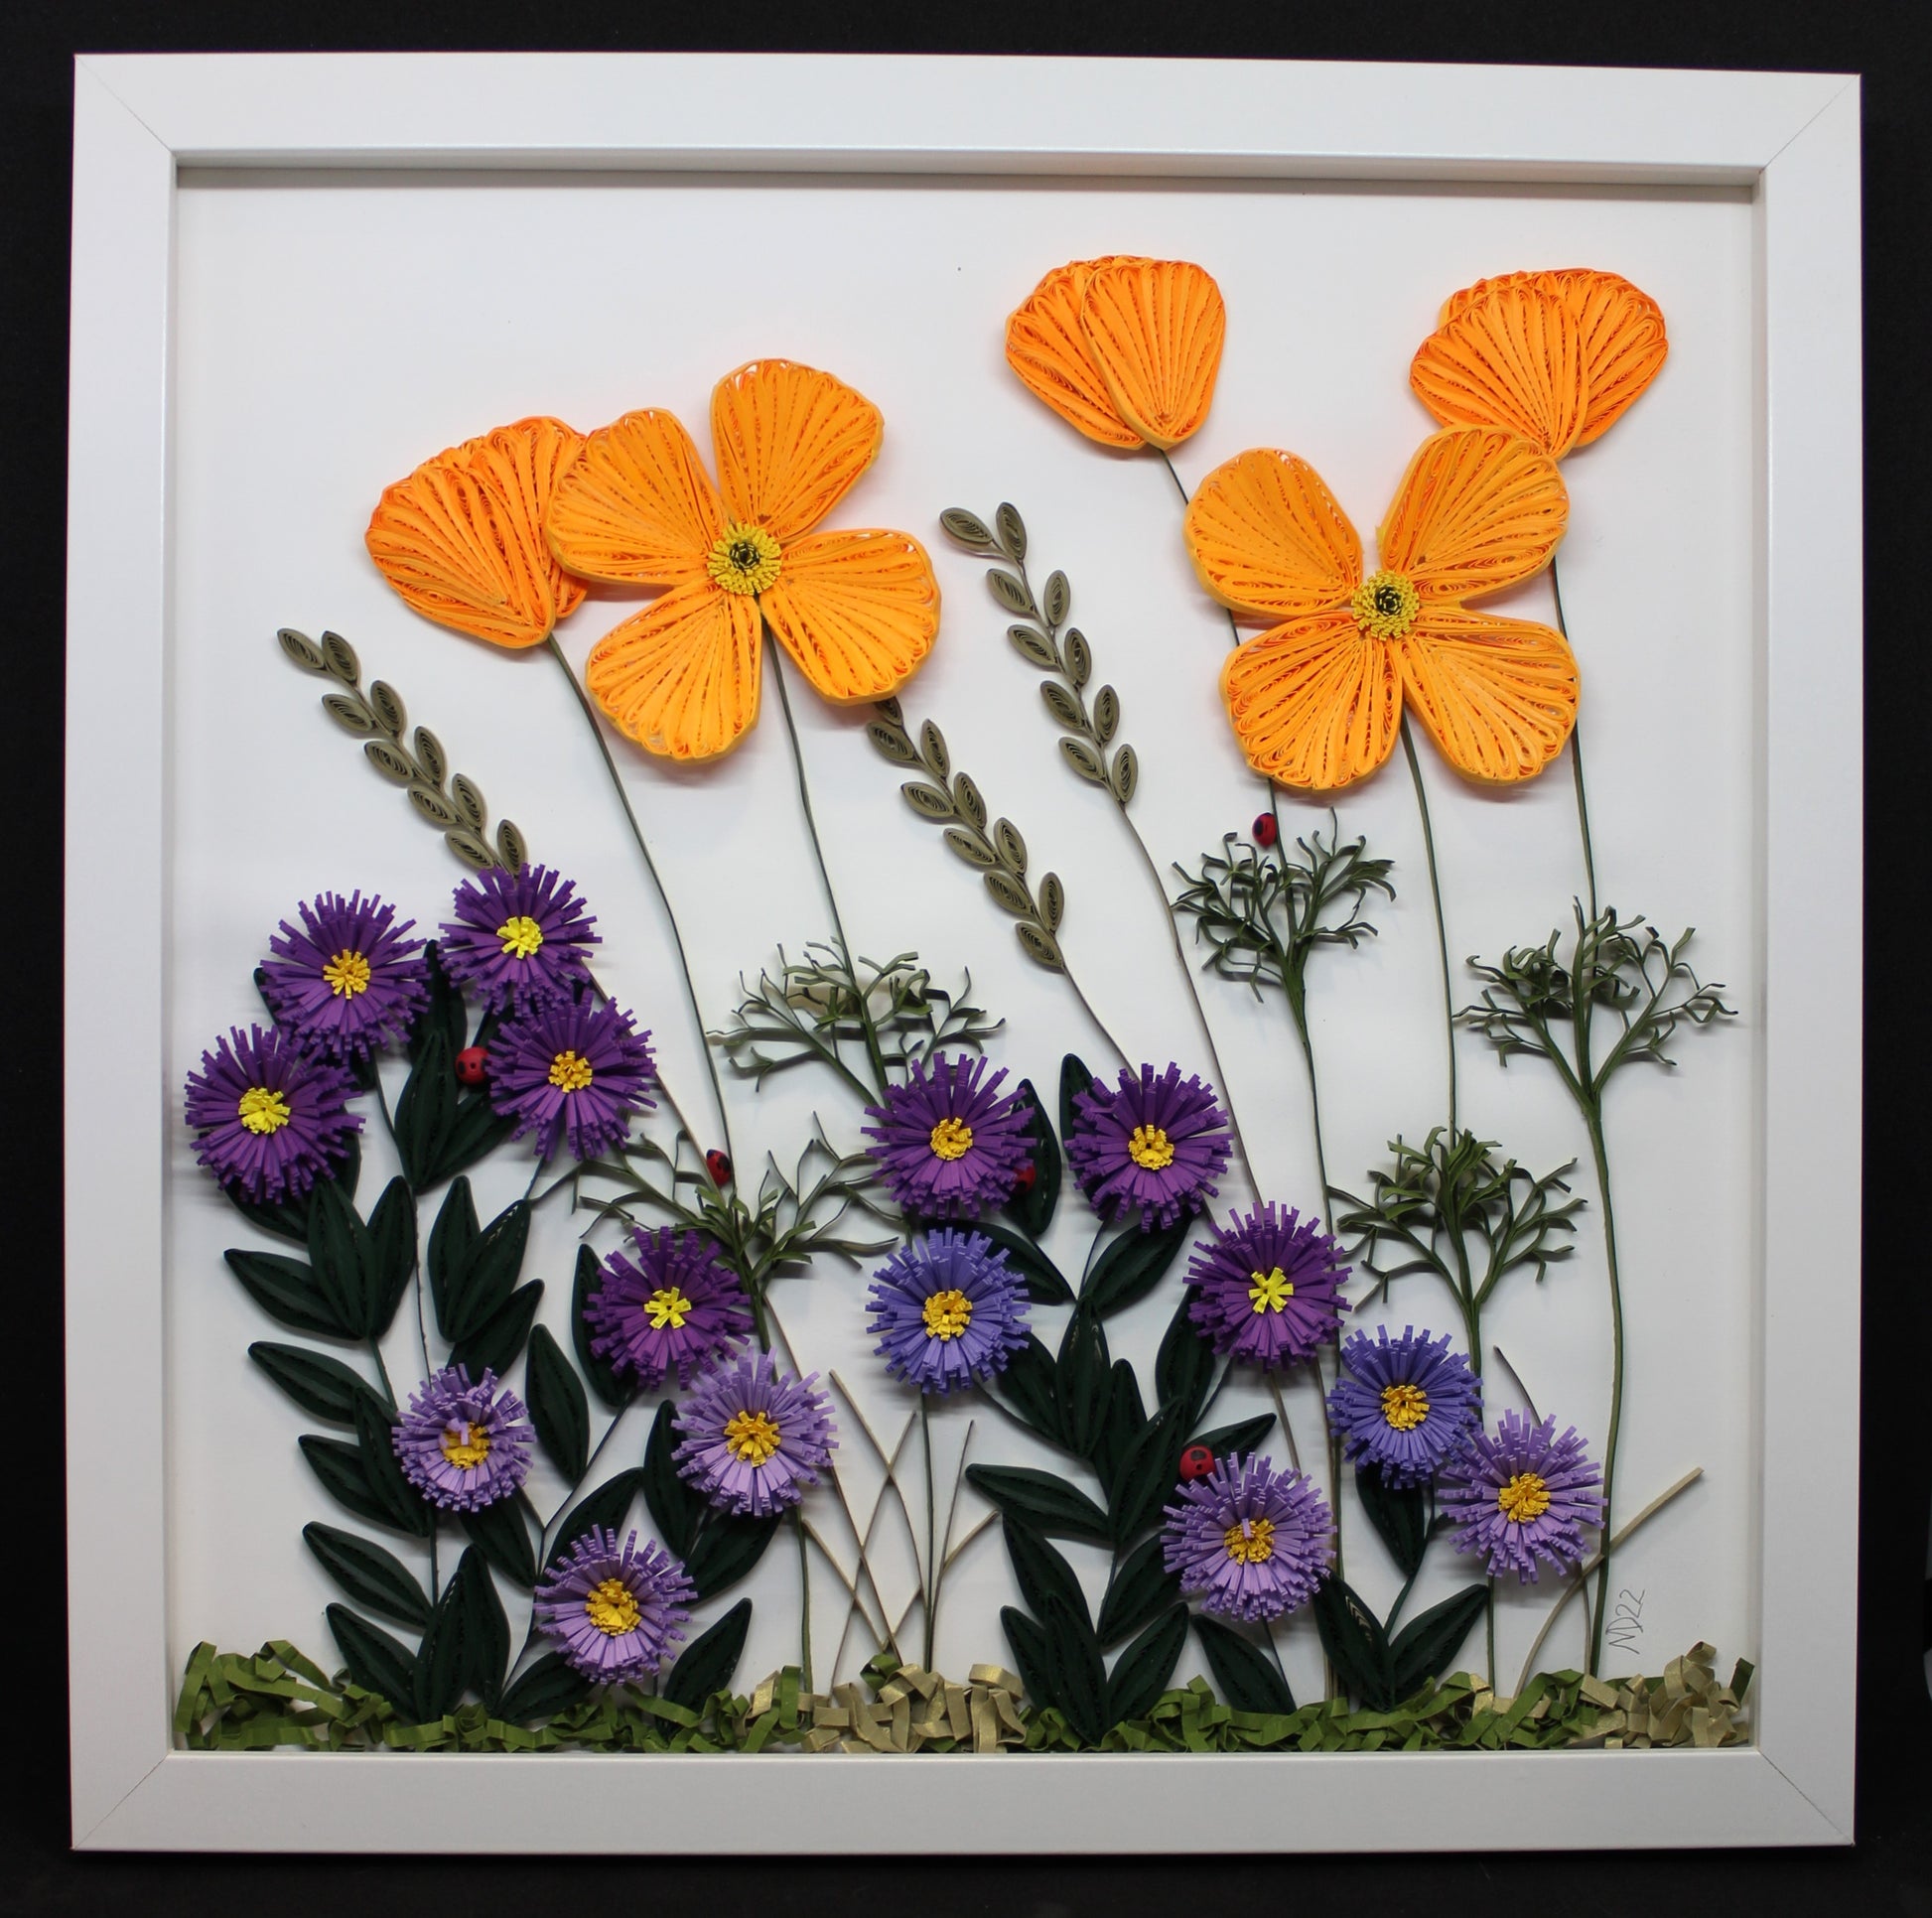 quilled paper wildflower arrangement with orange poppies, purple asters, grasses, and ladybugs